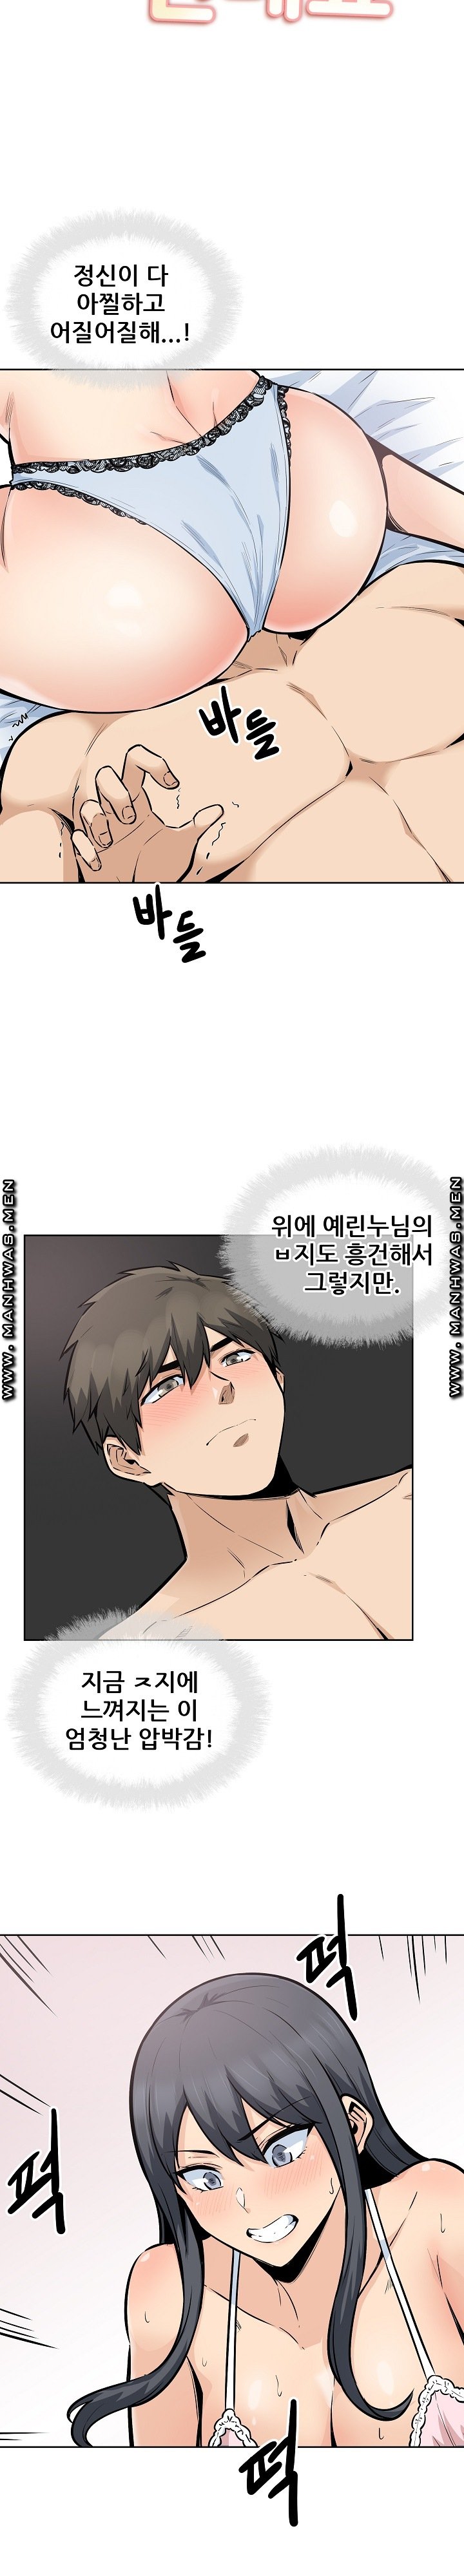 the-ark-is-me-raw-chap-86-1